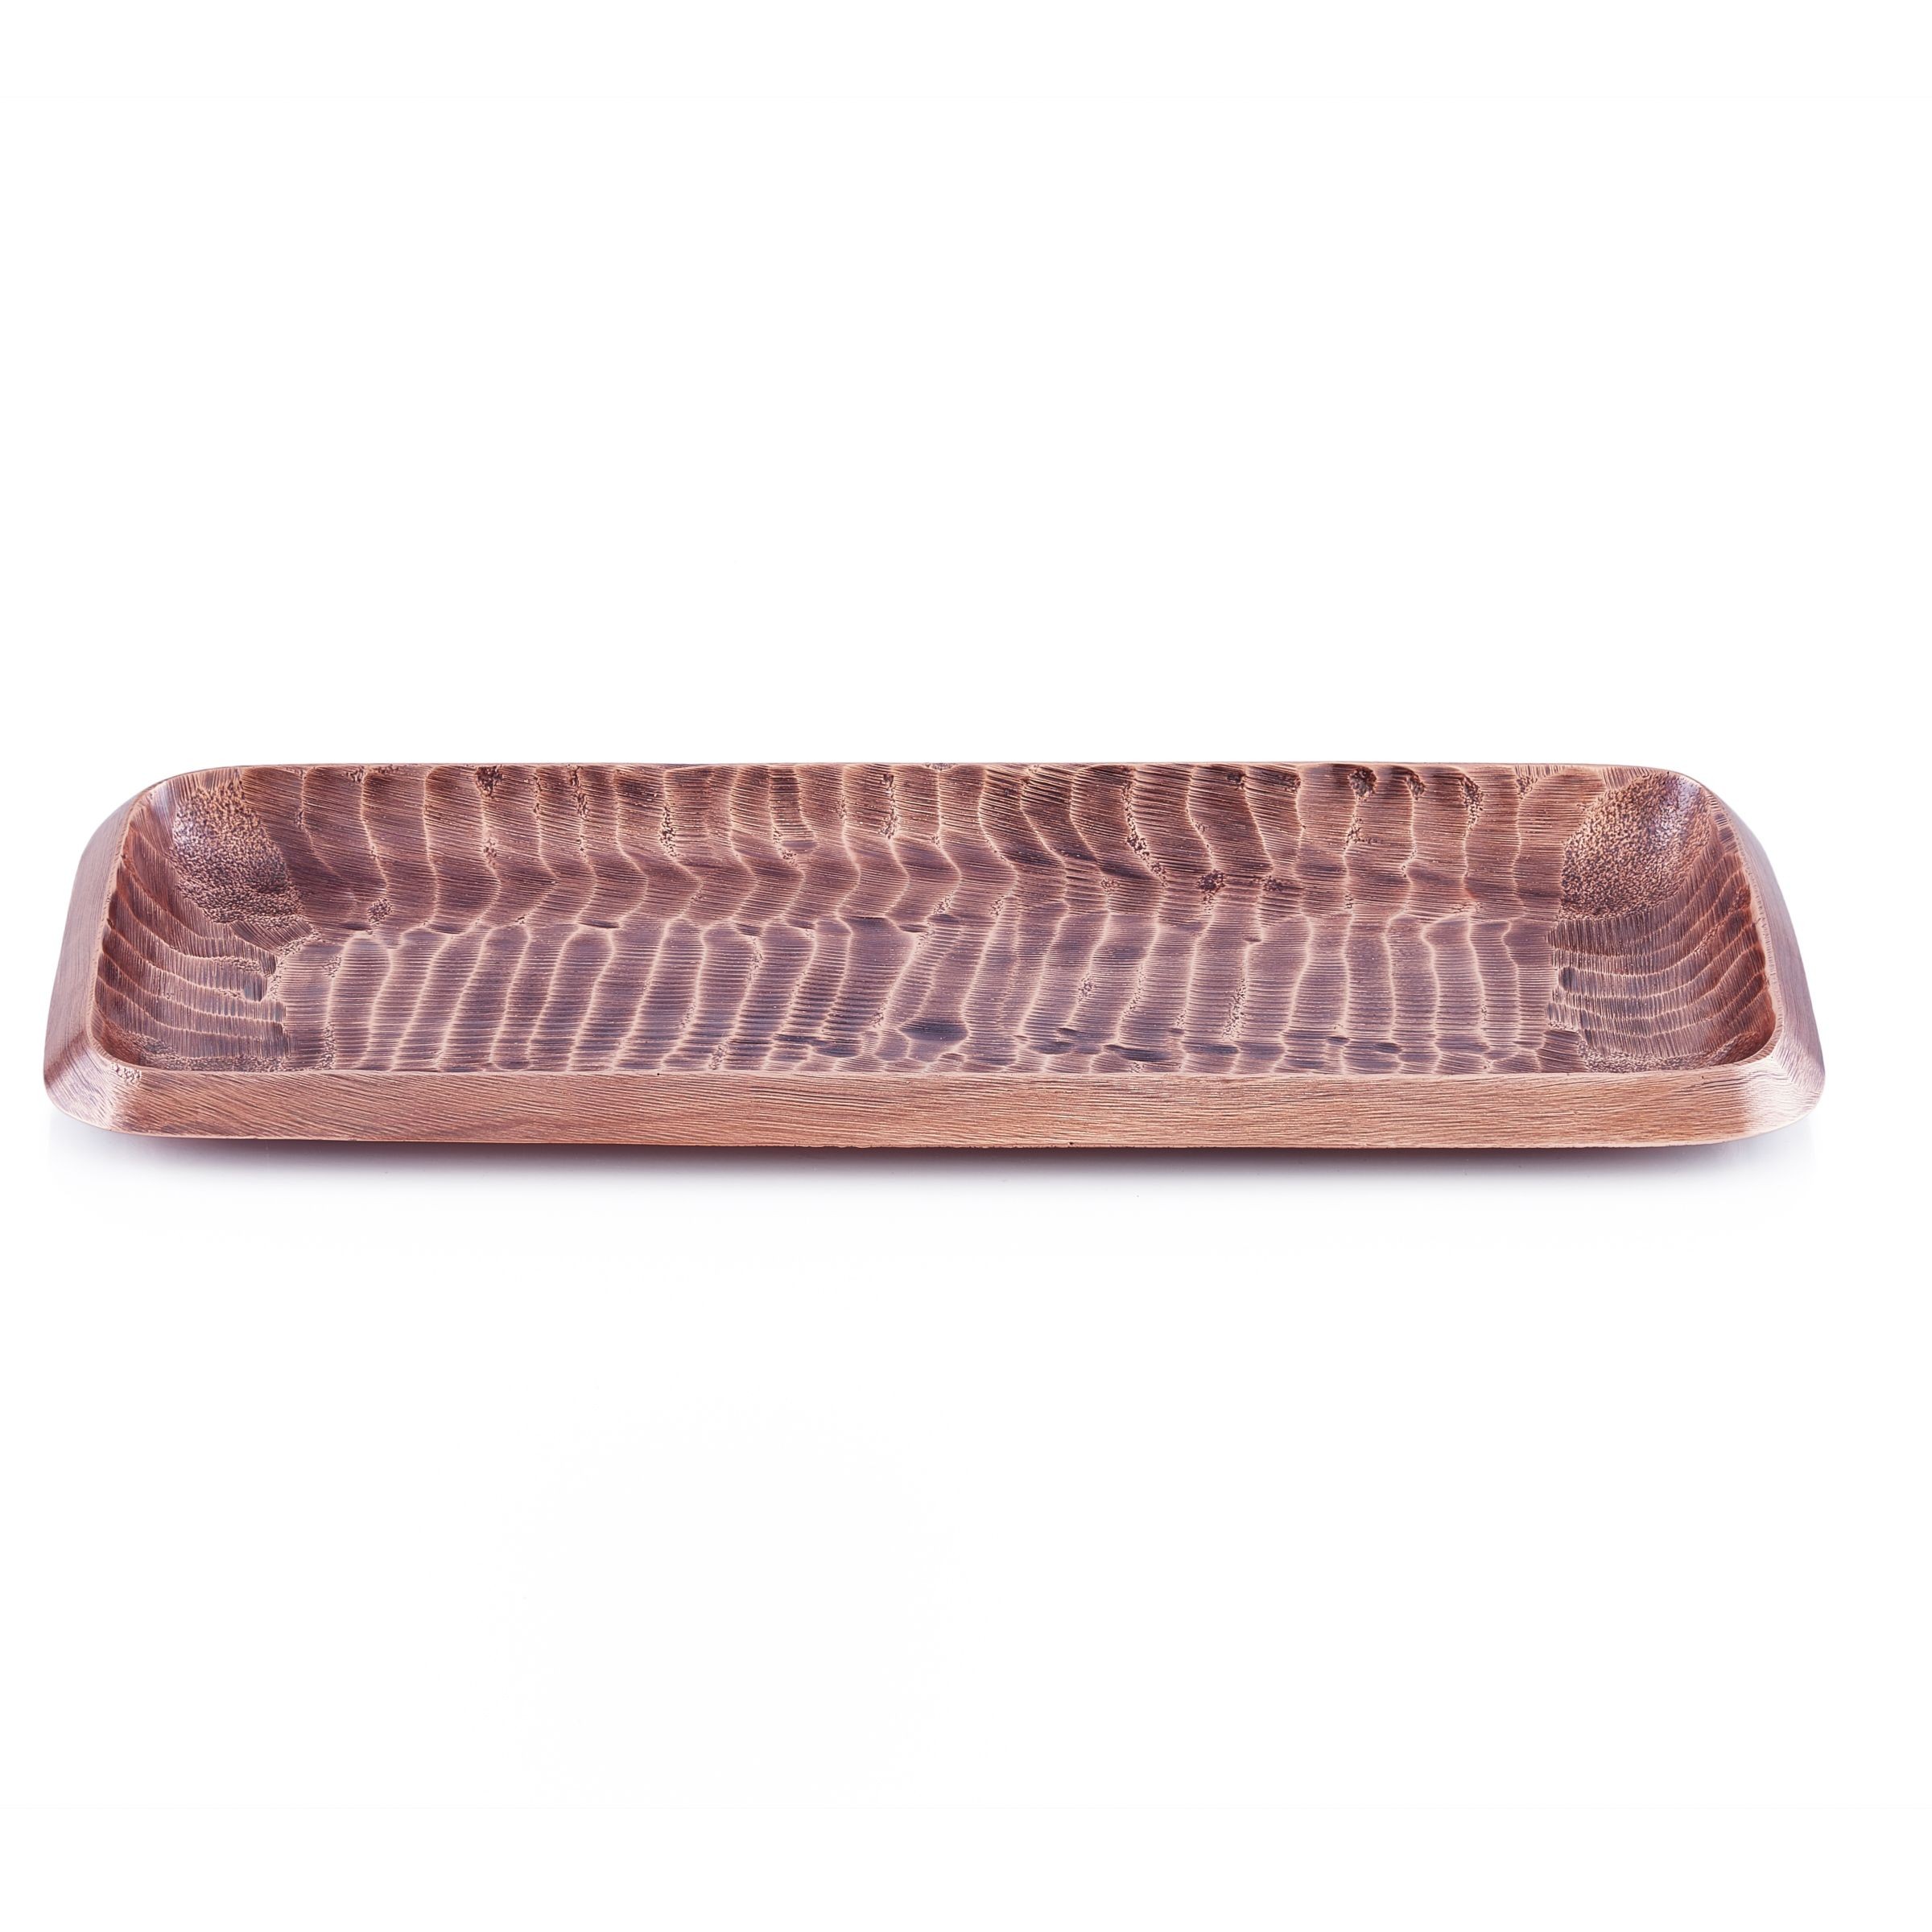 Old Dutch International A5116 Tribal Aluminum Rectangular Tray with Antique Copper Finish, 17 1/2" x 7"